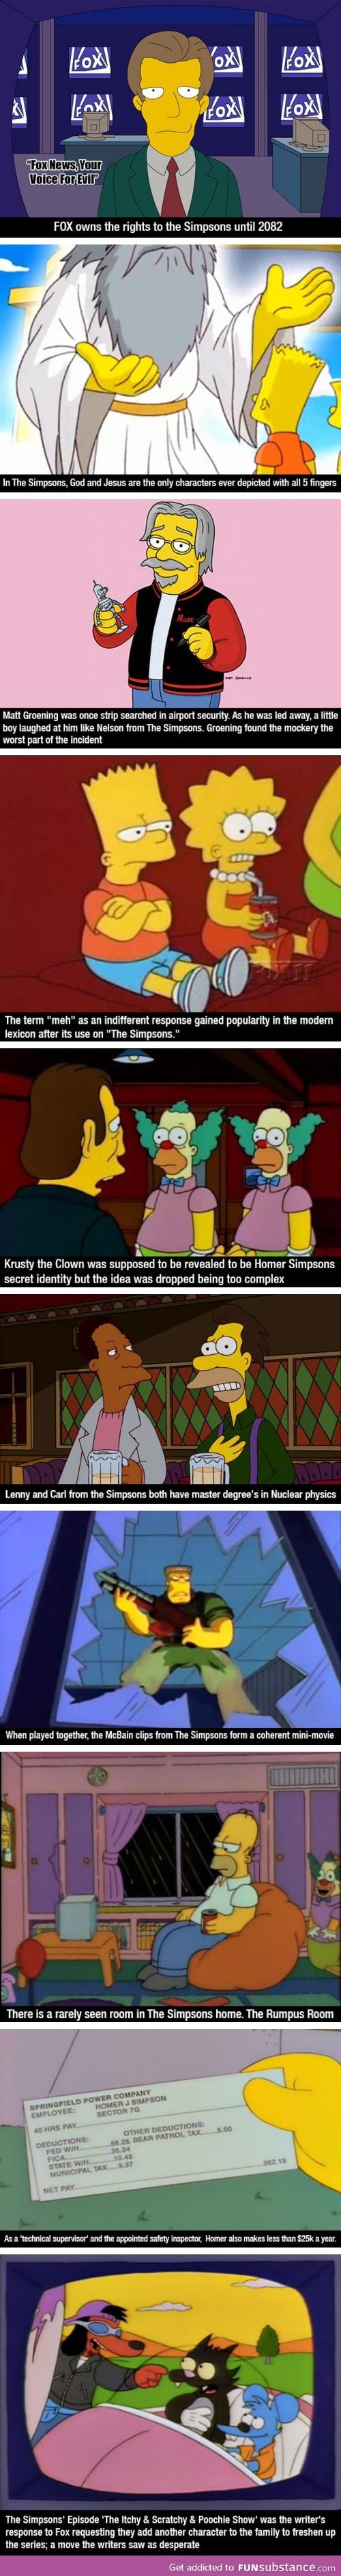 Interesting facts about The Simpsons